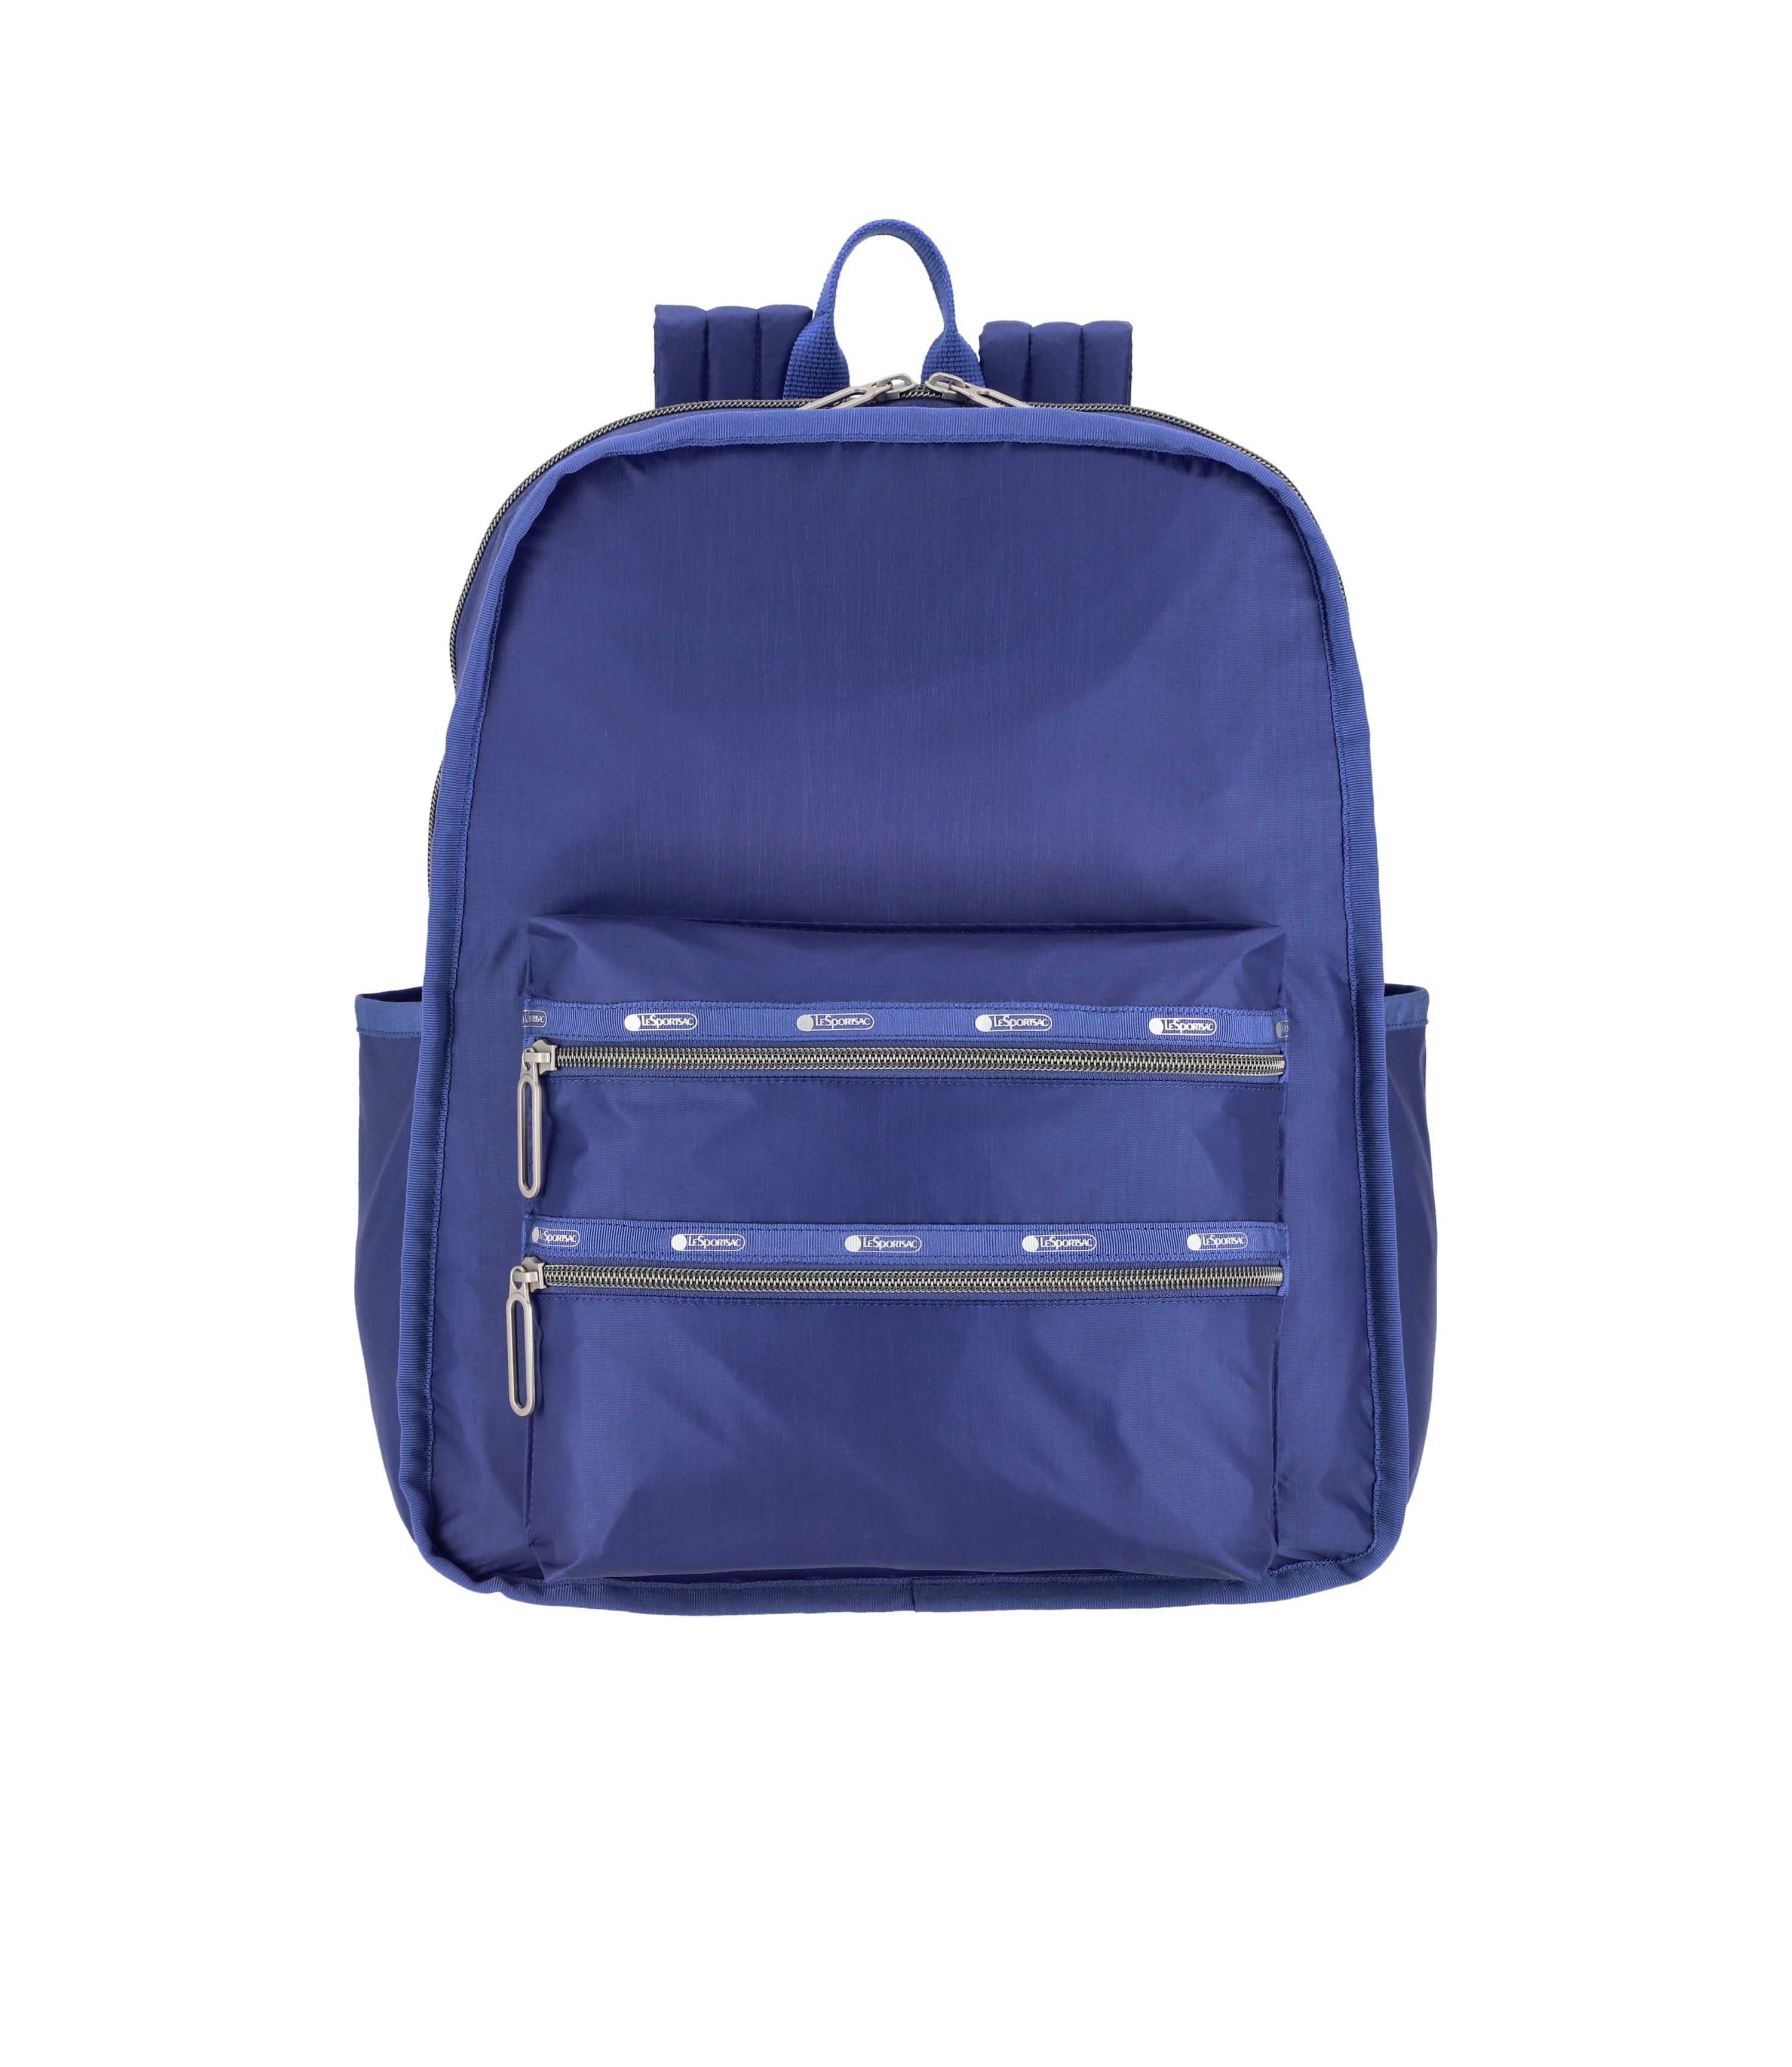 Functional Backpack - Dazzling Blue C